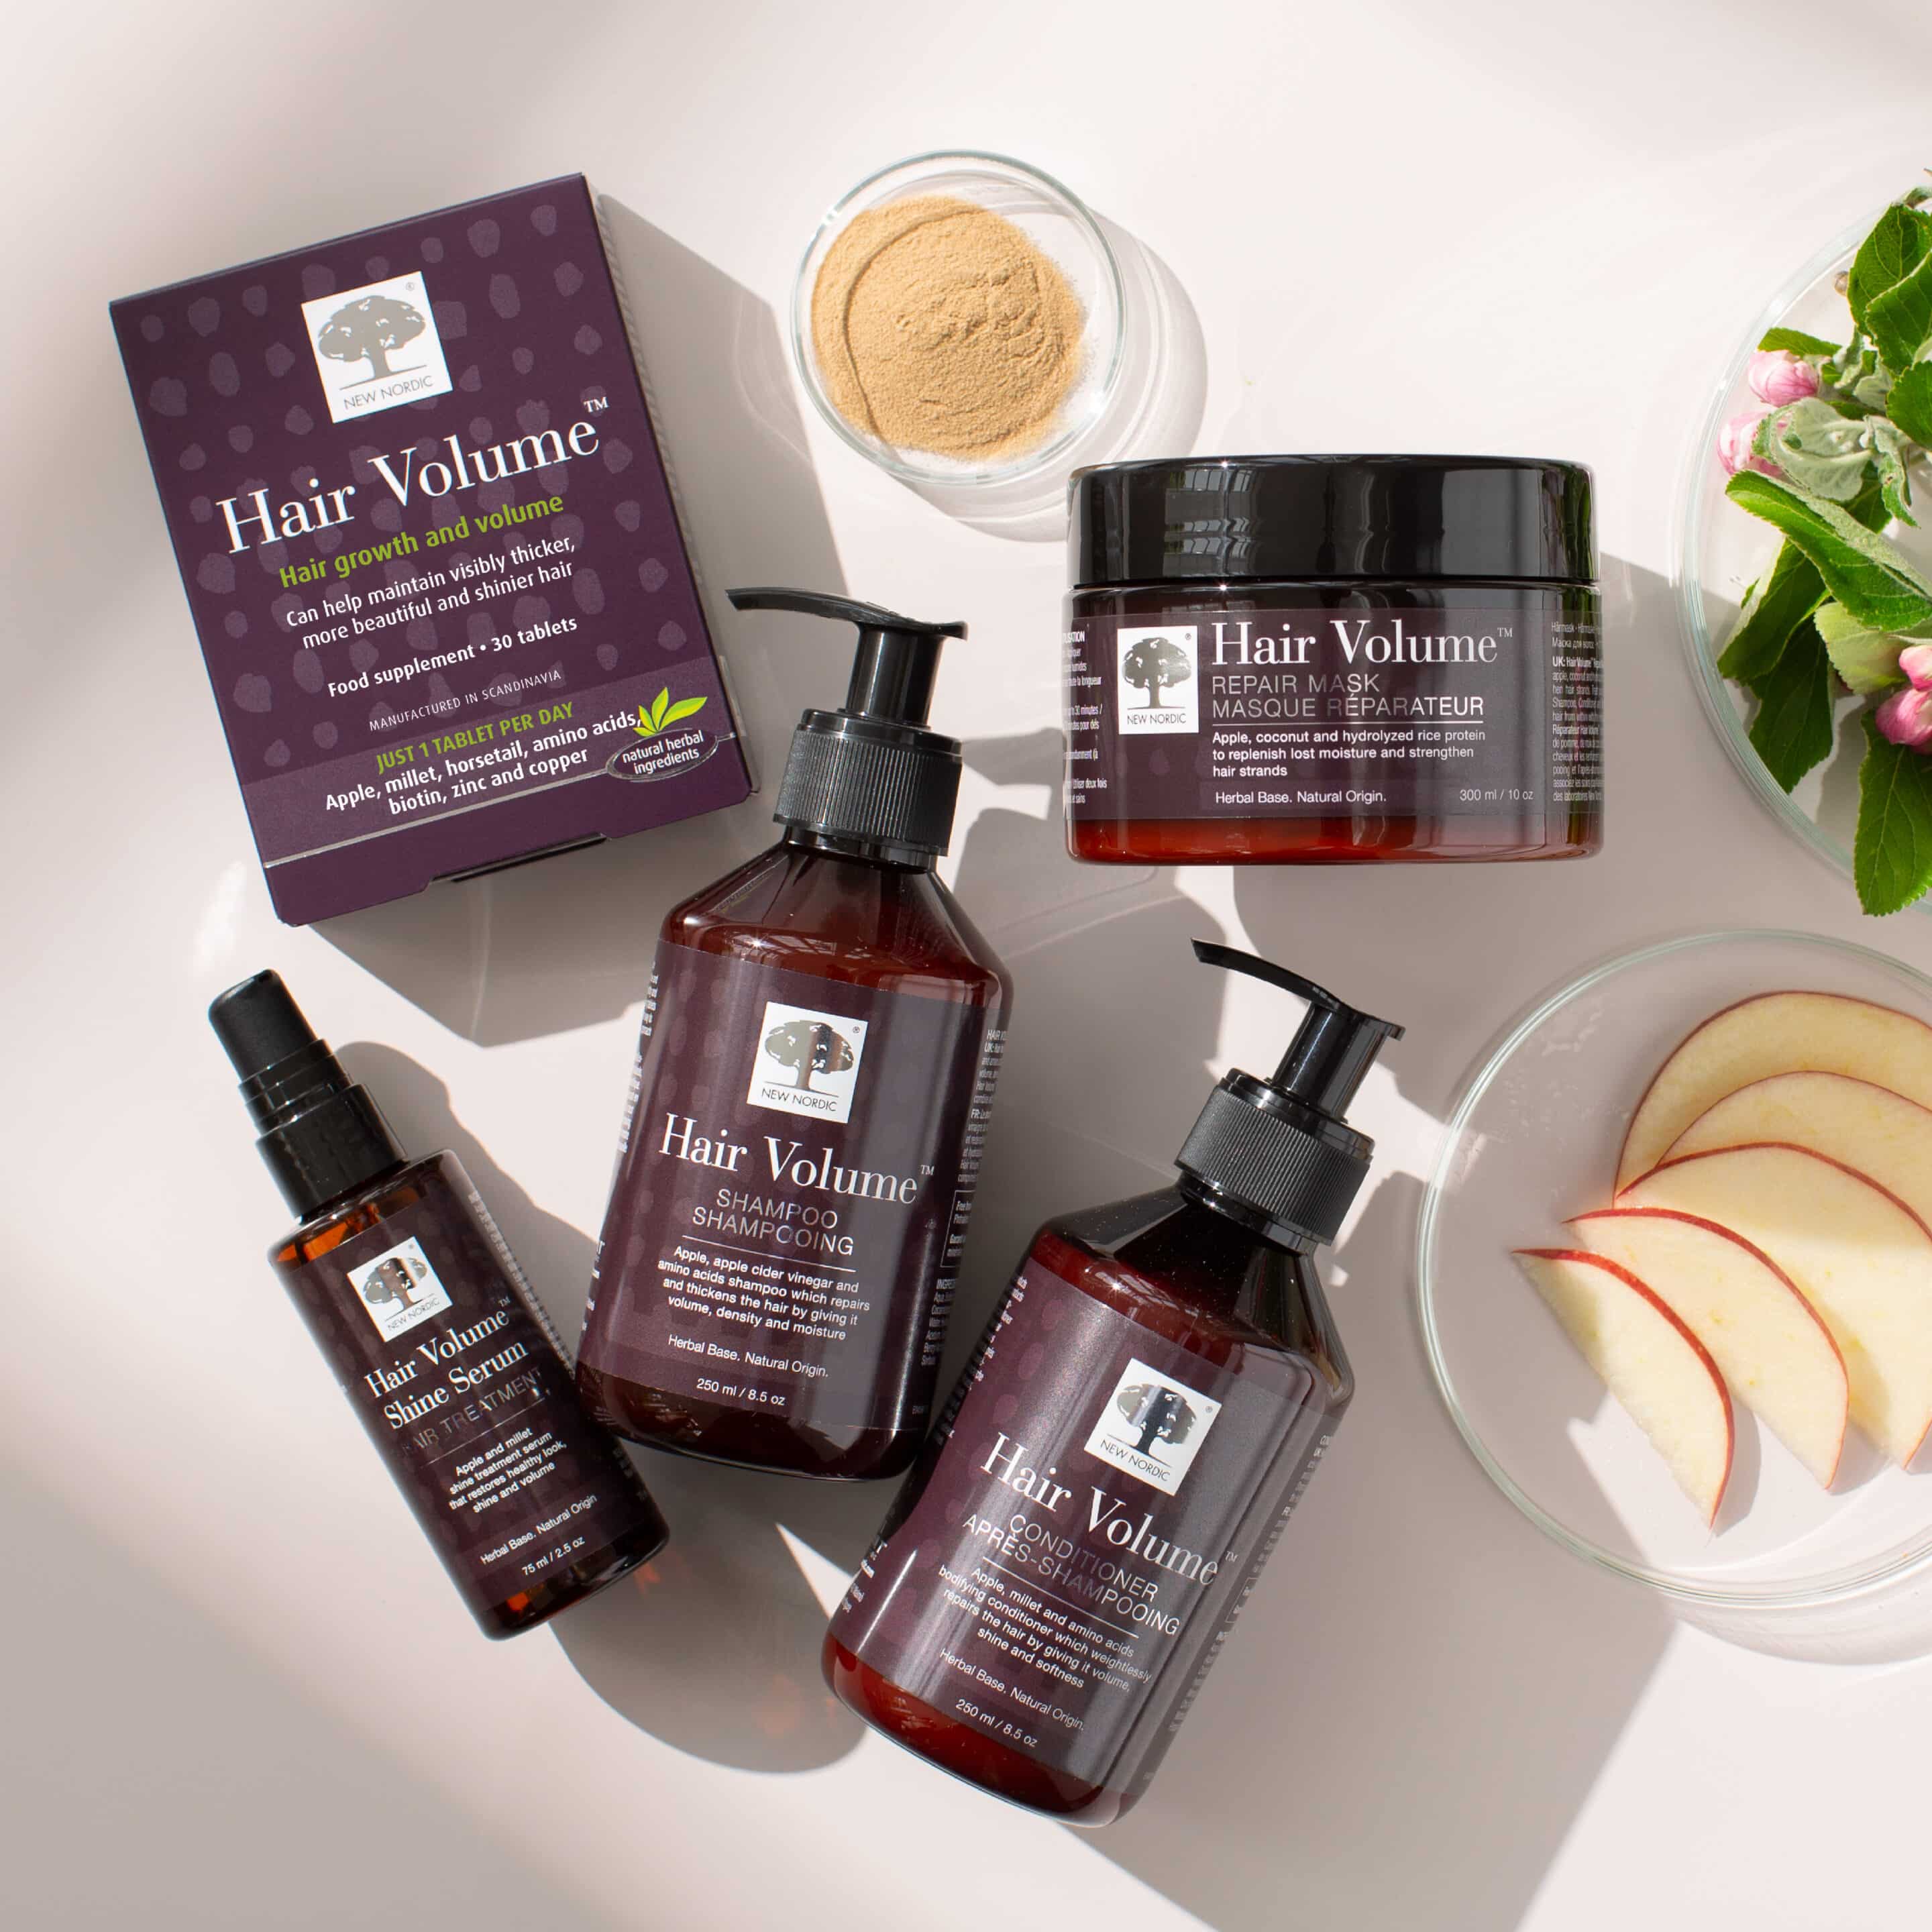 Hair Volume™ hair treatment range products laid out on a flat surface with some additional items on it